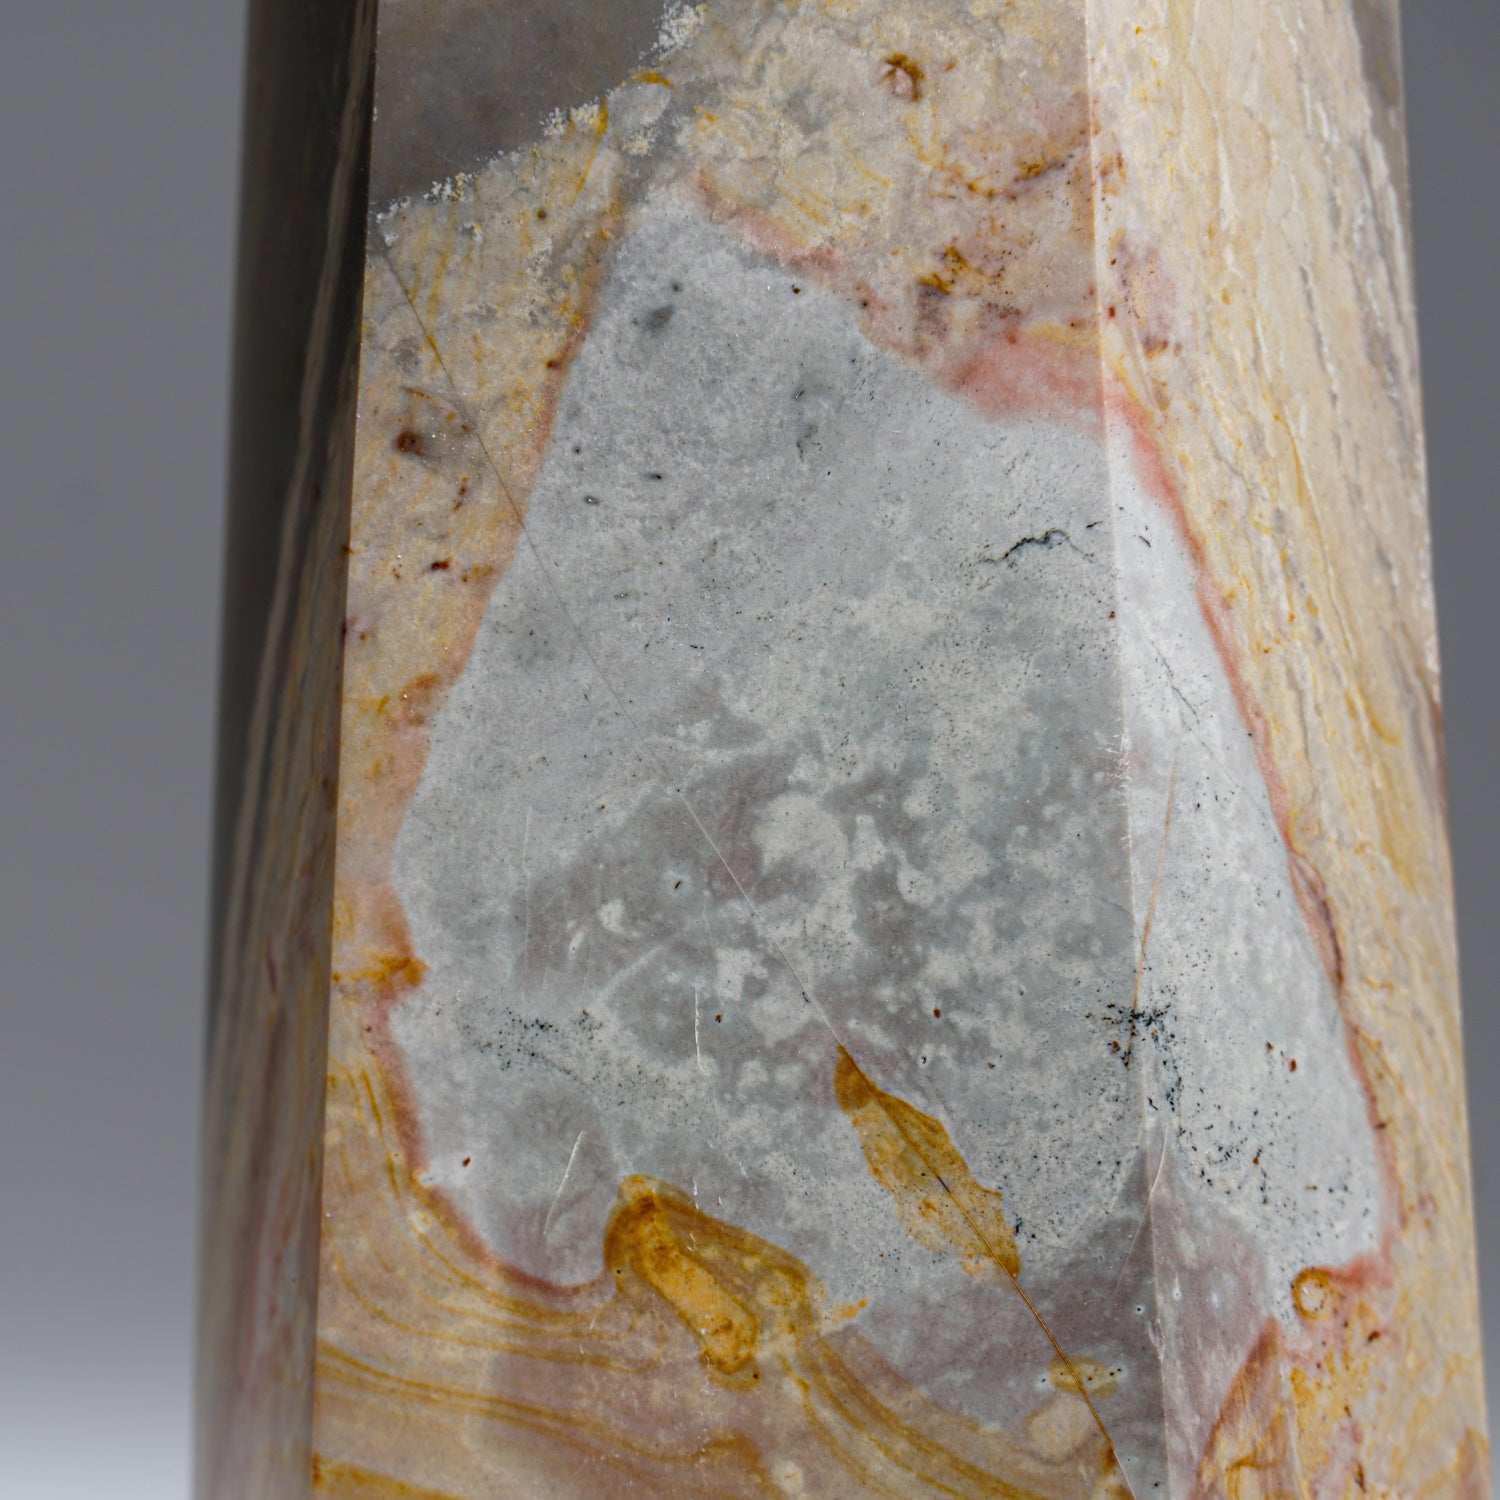 Polished Polychrome Point from Madagascar (2 lbs)